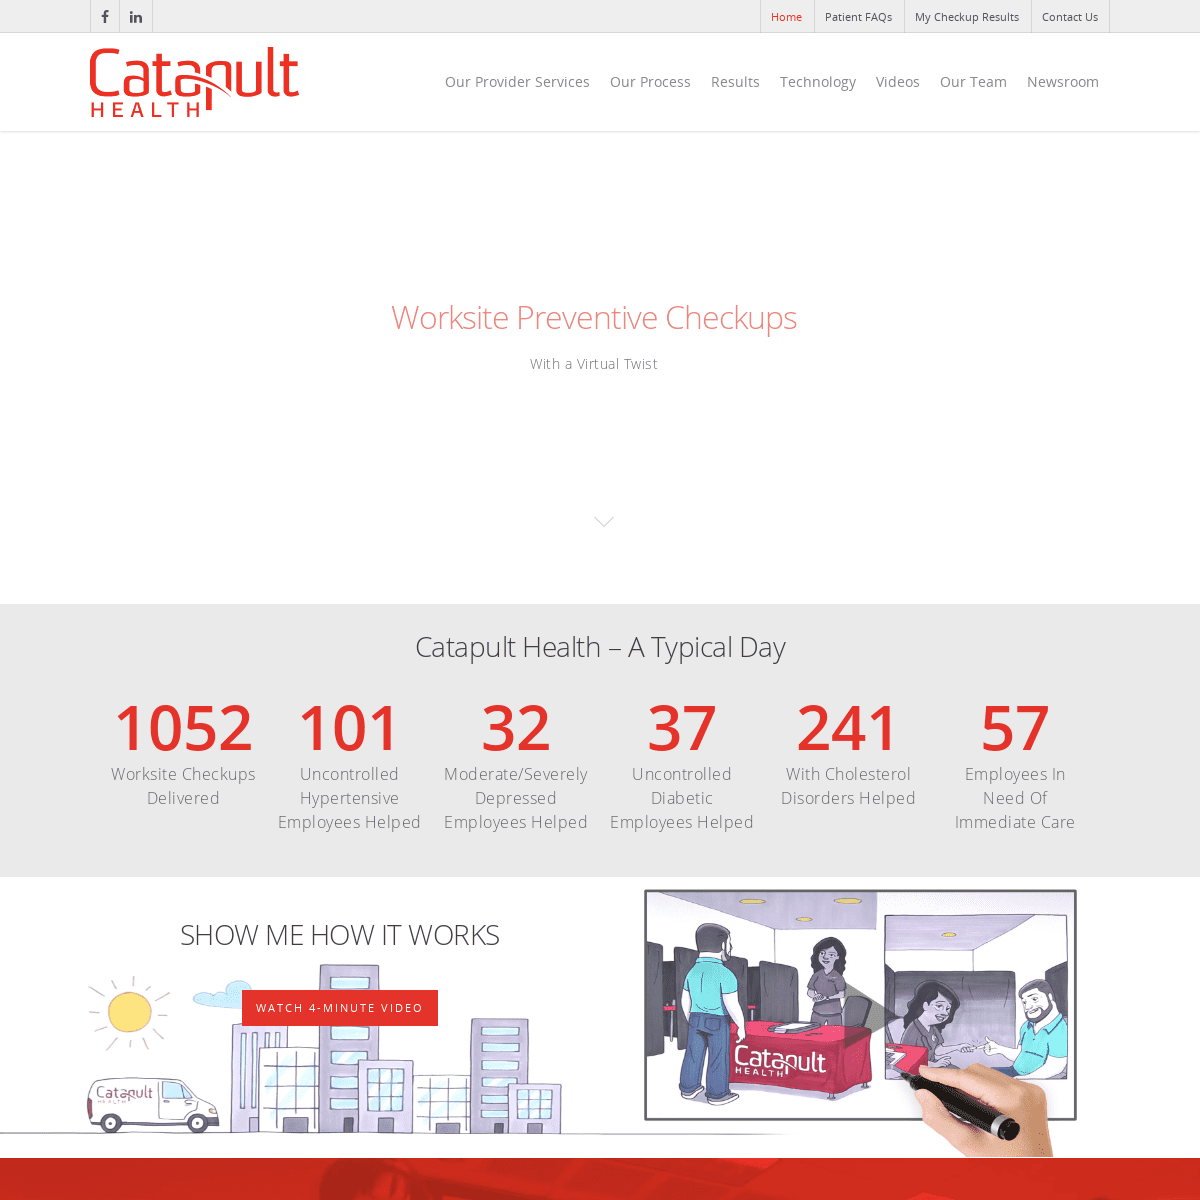 A complete backup of catapulthealth.com